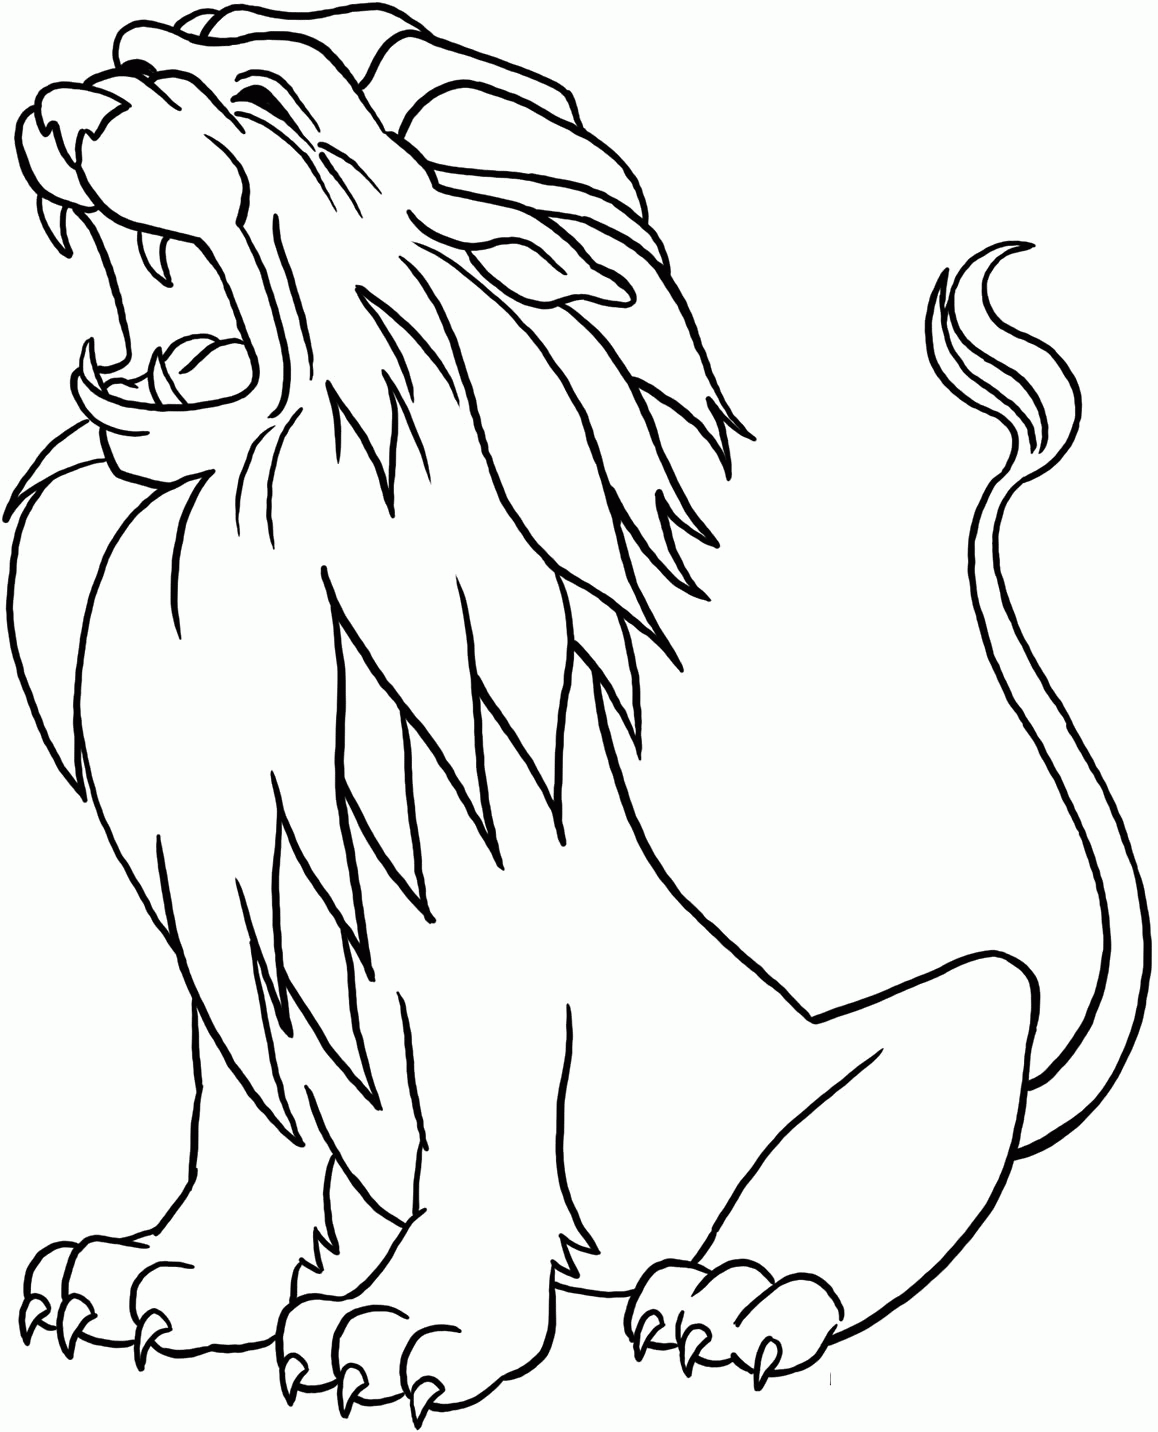 Library Lion Coloring Pages - Coloring Home